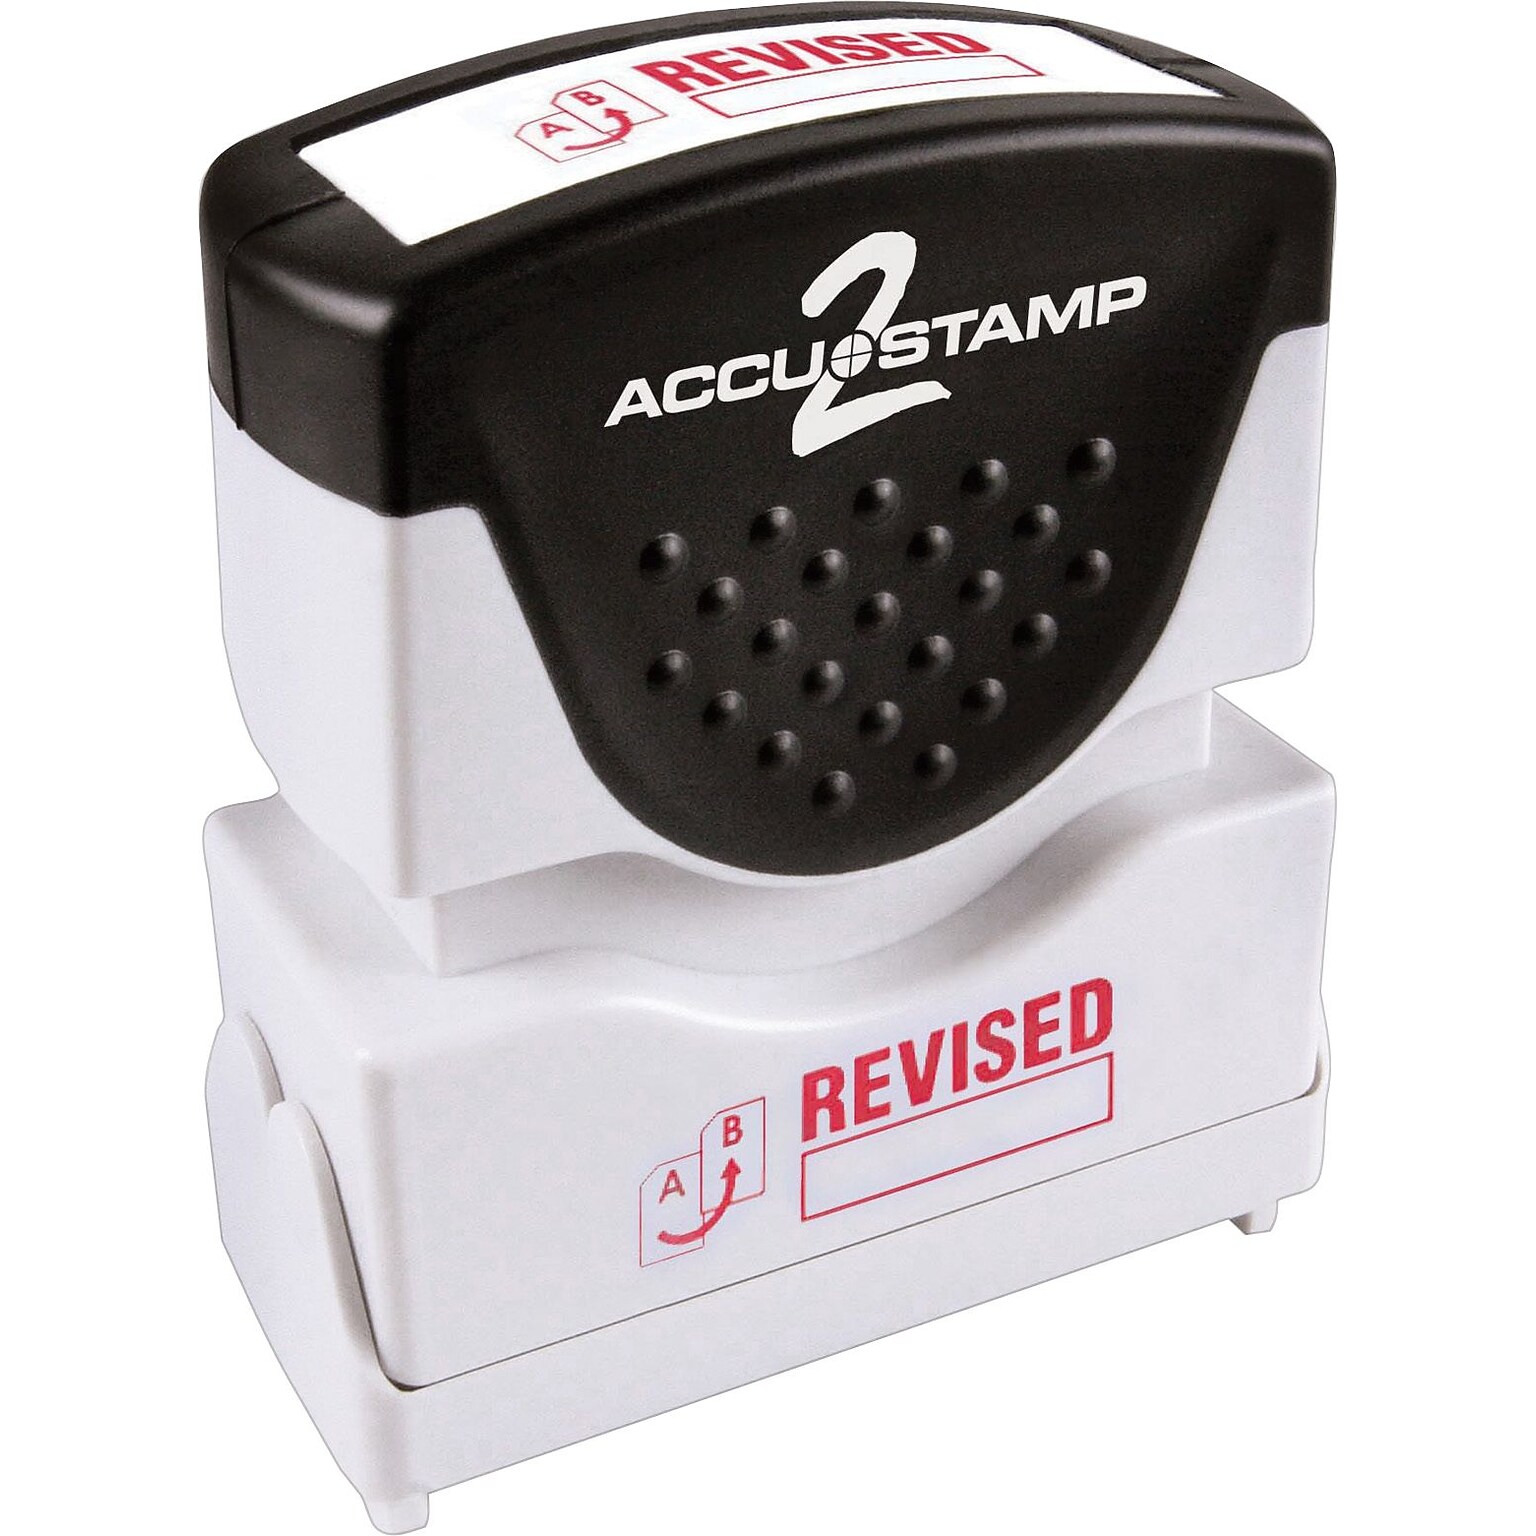 Accu-Stamp2 One-Color Pre-Inked Shutter Message Stamp, REVISED, 1/2 x 1-5/8 Impression, Red Ink (035587)